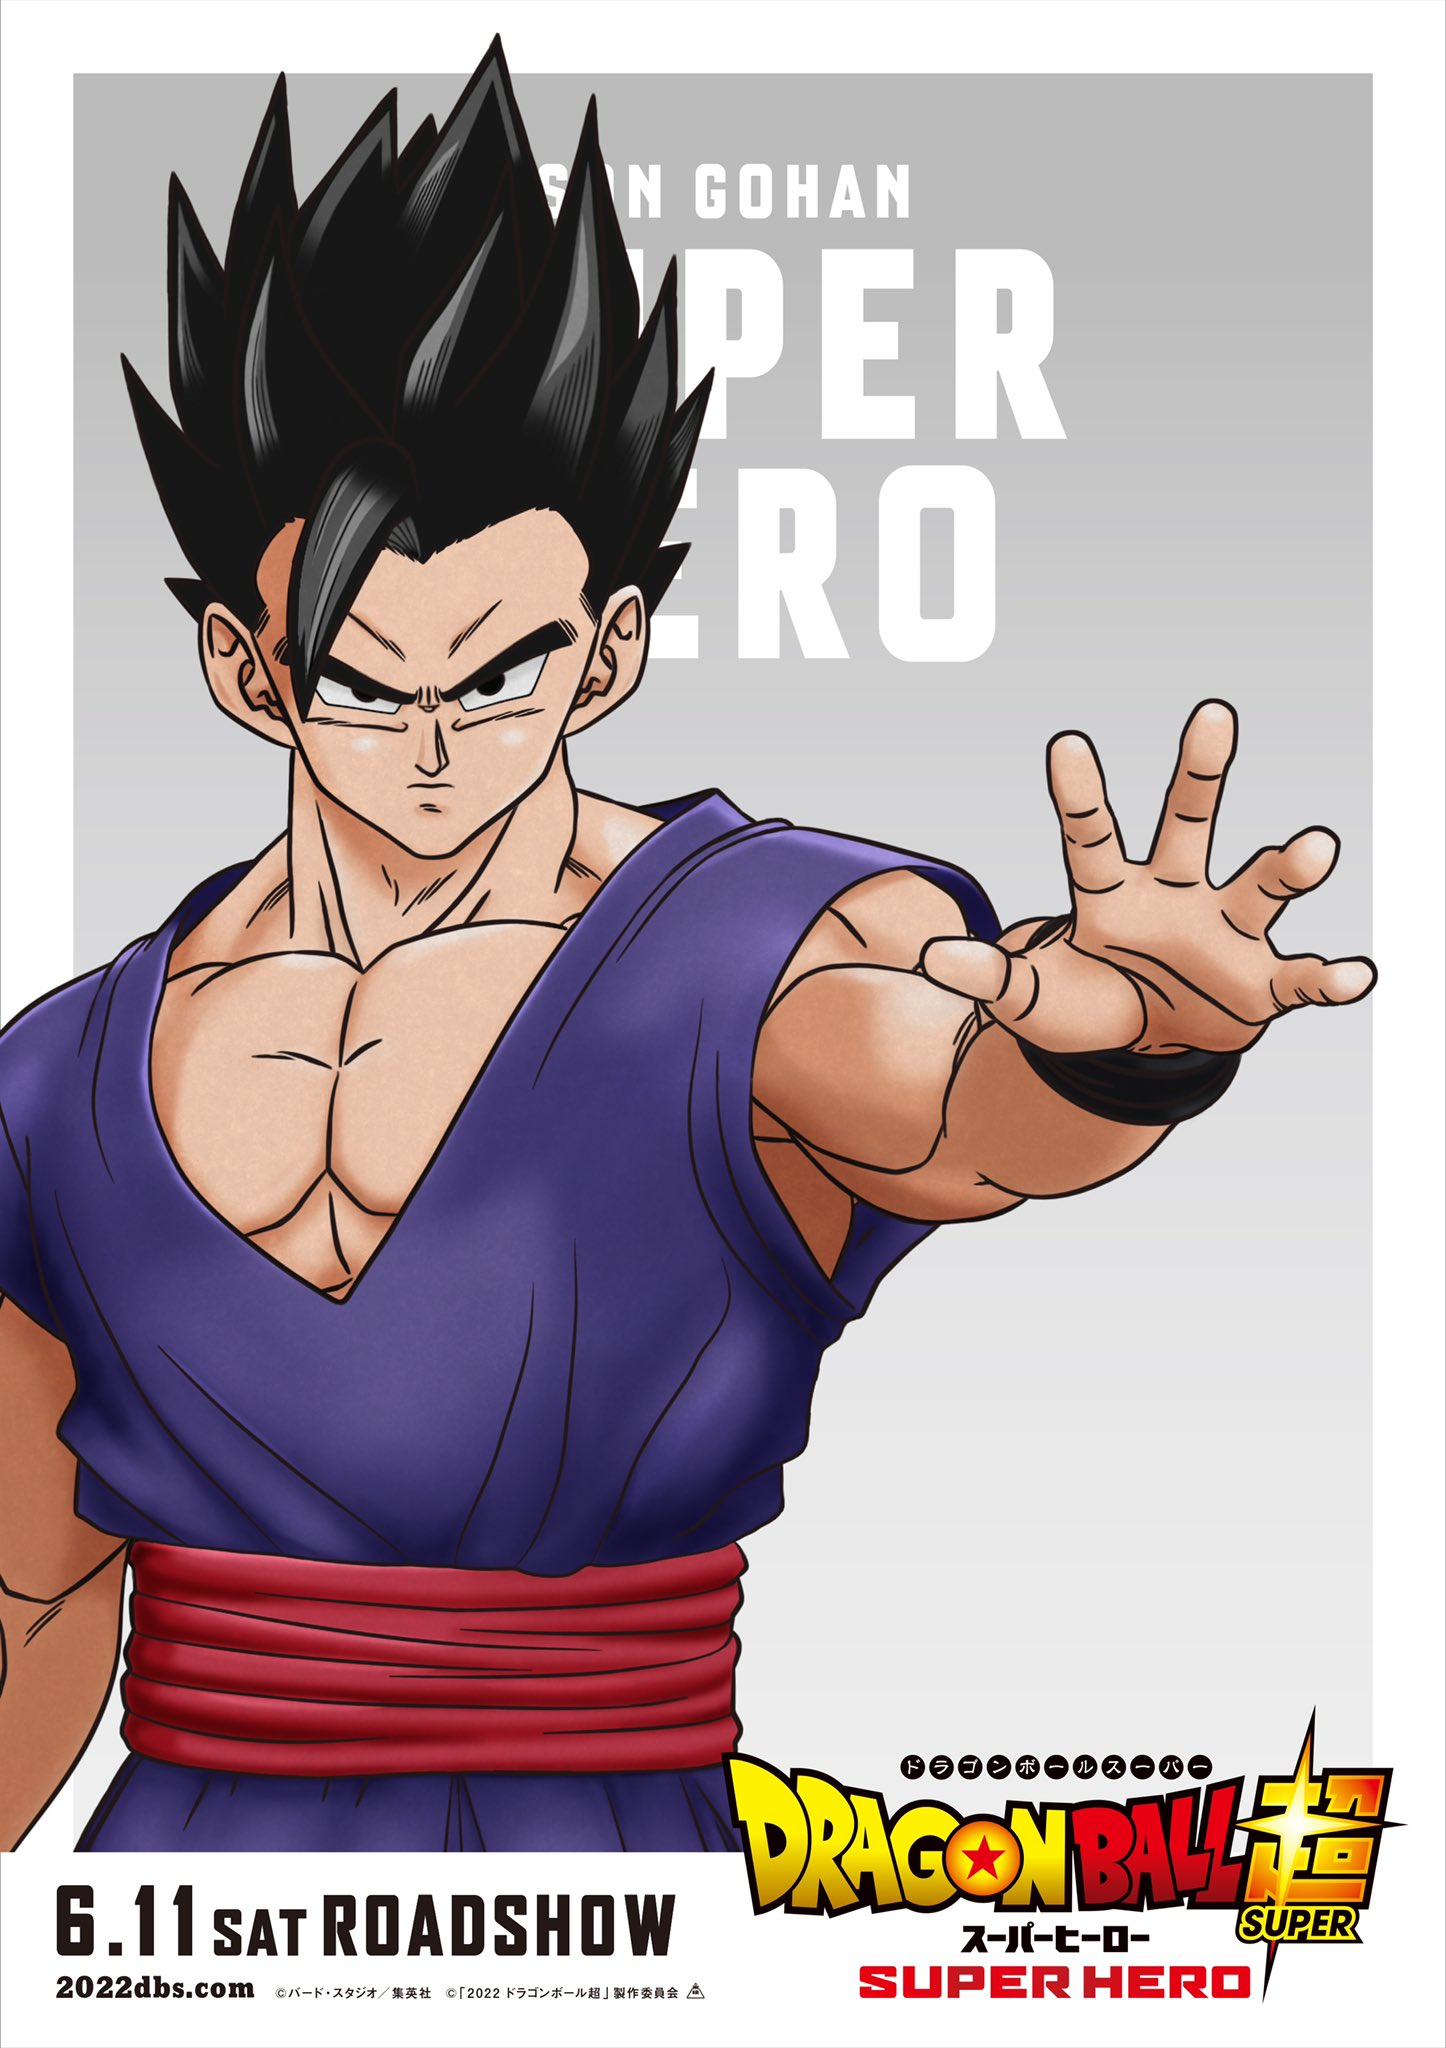 Dragon Ball Super Super Hero New Character Posters and a Small Theory. JCR Comic Arts